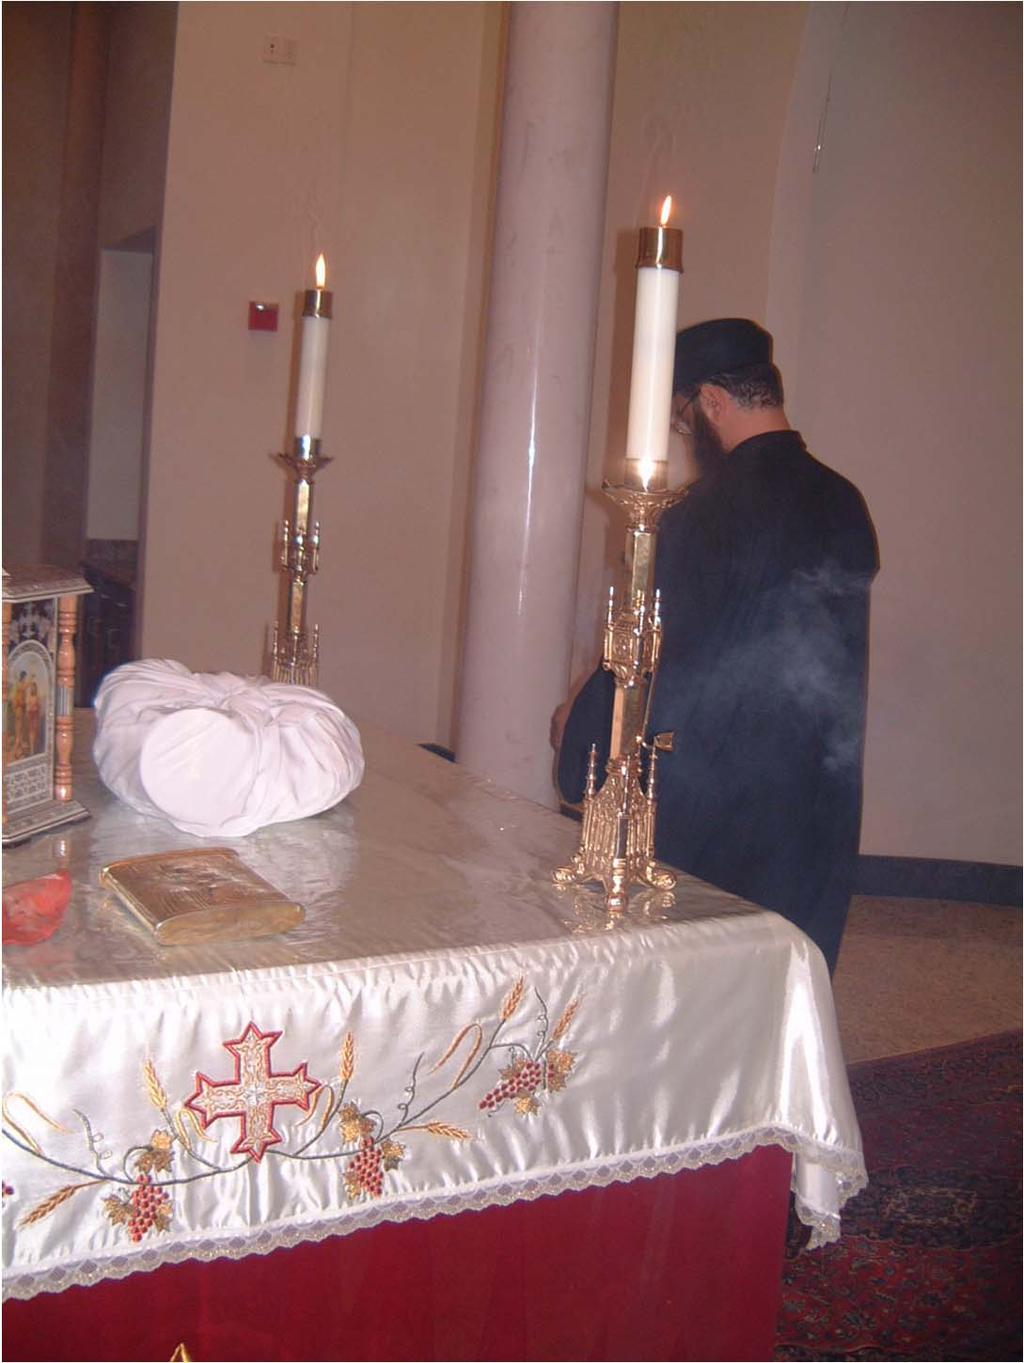 After putting the spoonfuls of incense, the priest takes the censer and makes three complete processions around the altar and the deacon